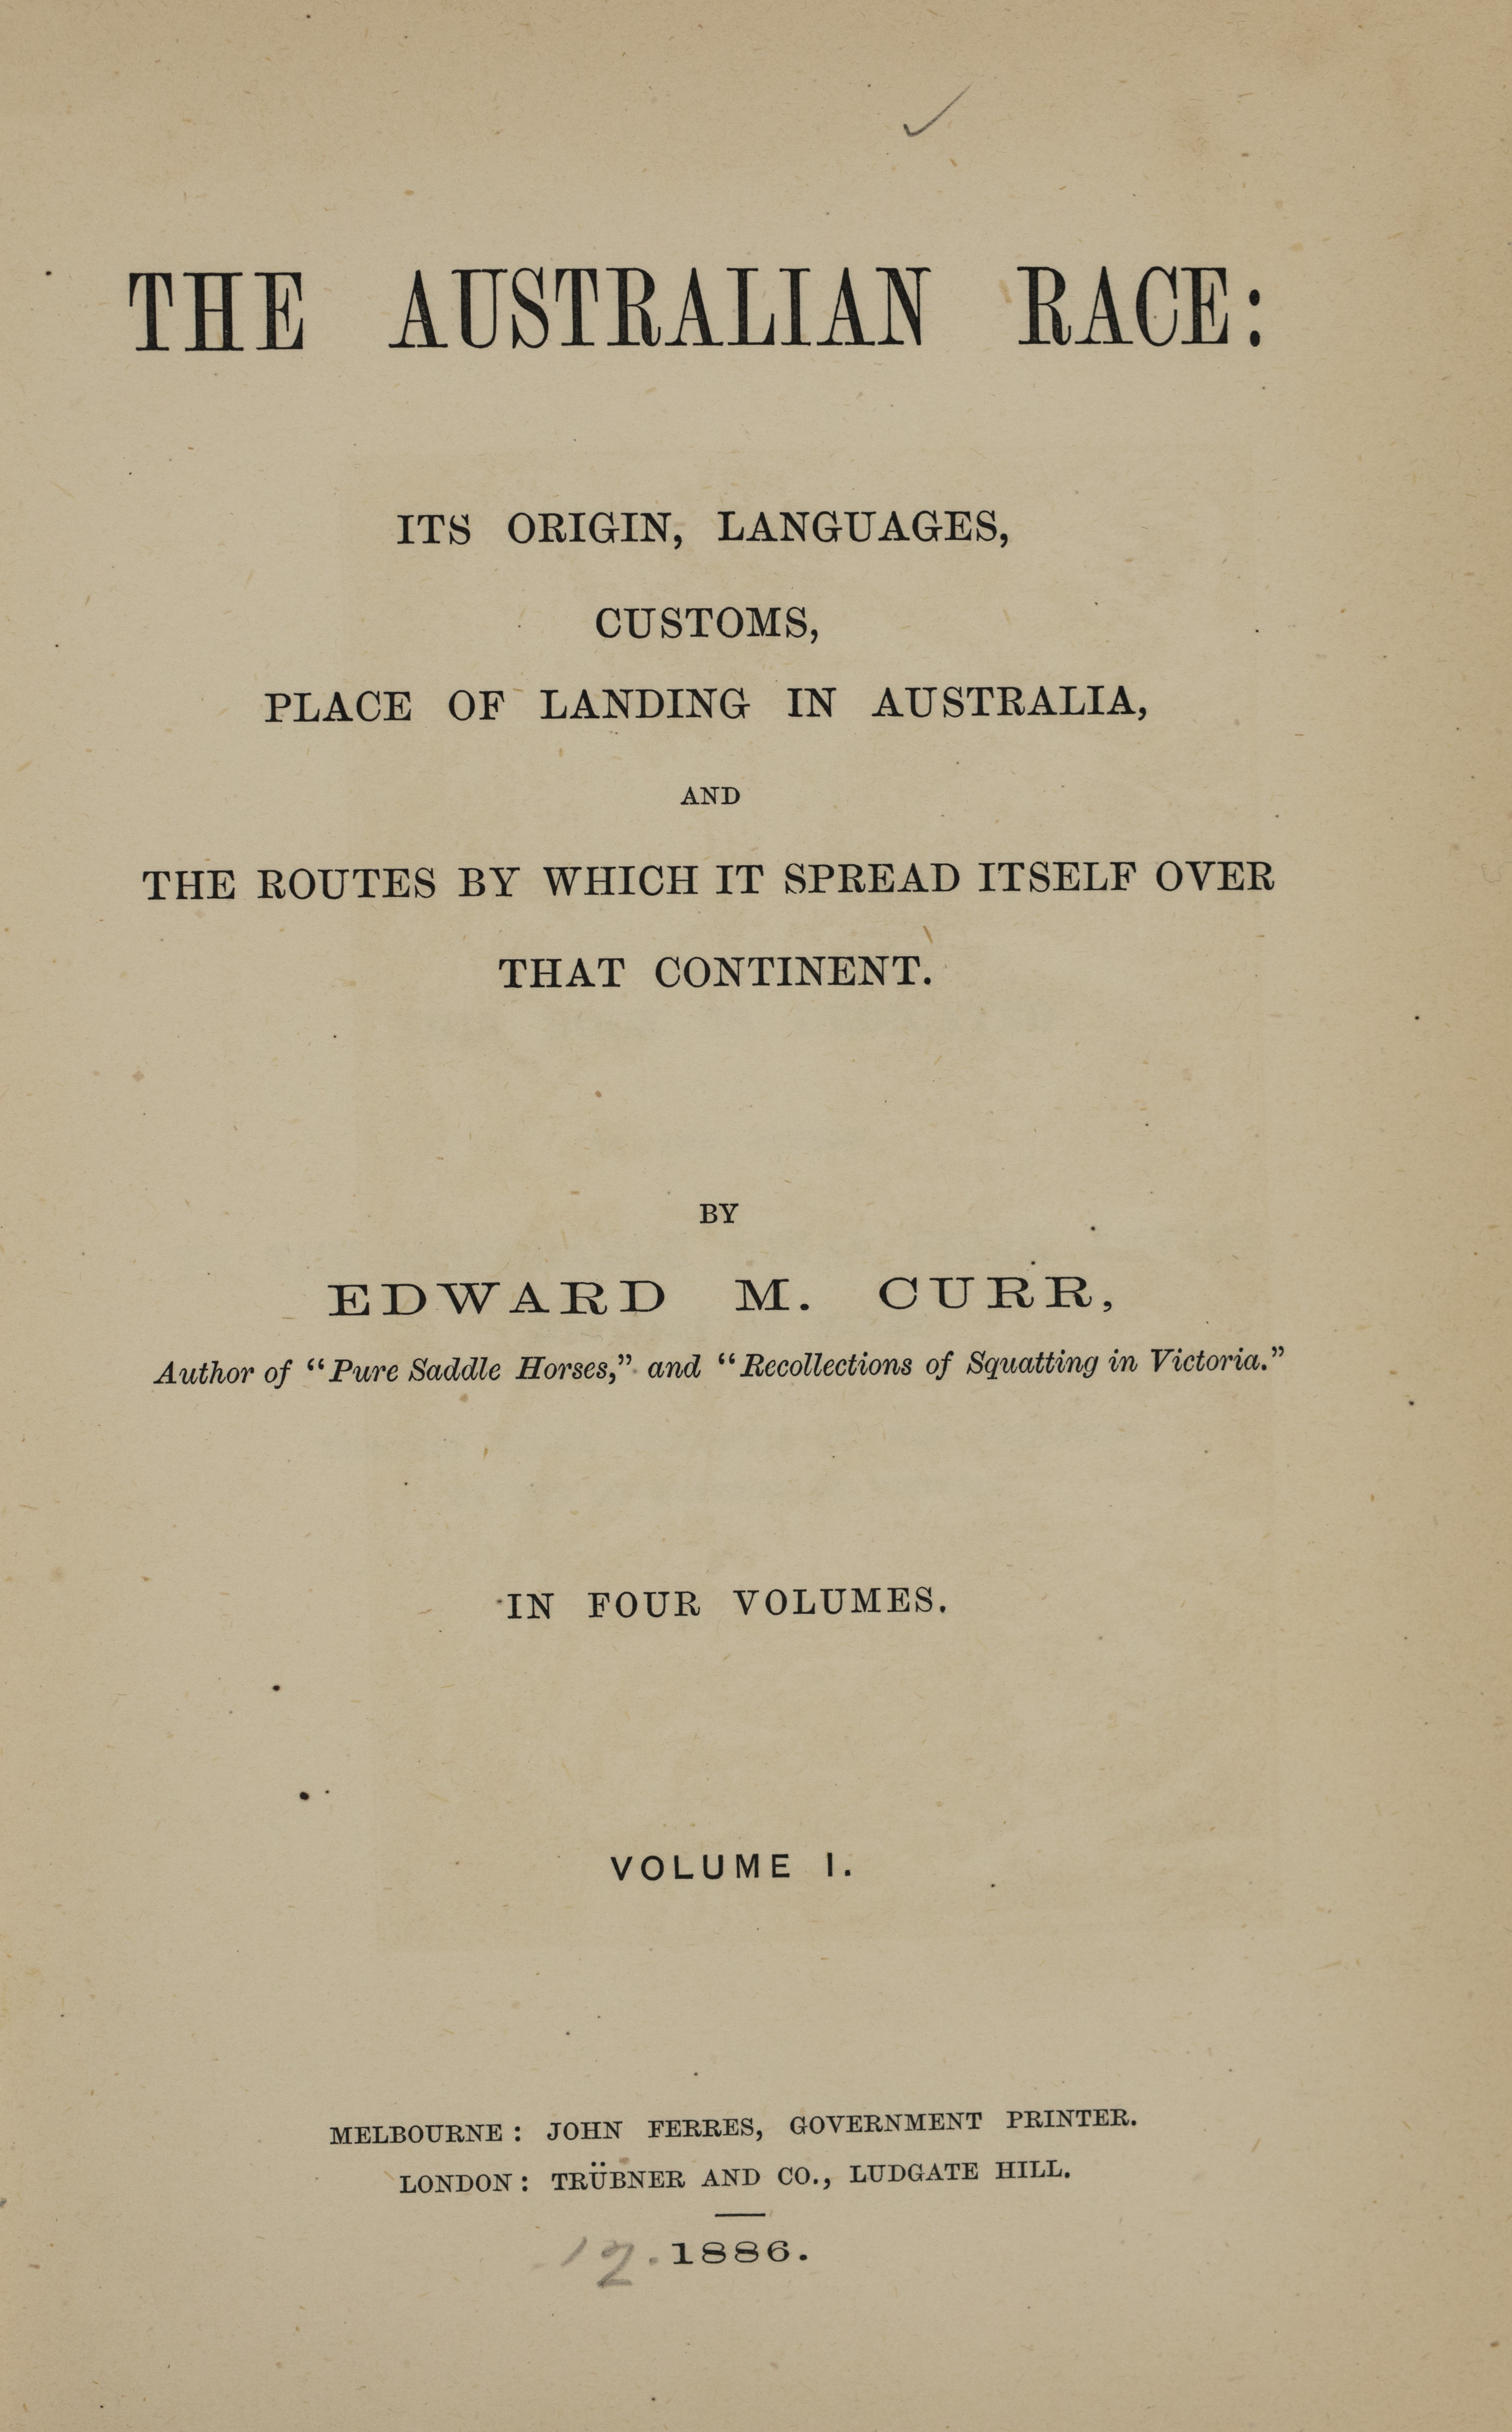 Title page for book The Australian Race published 1886.